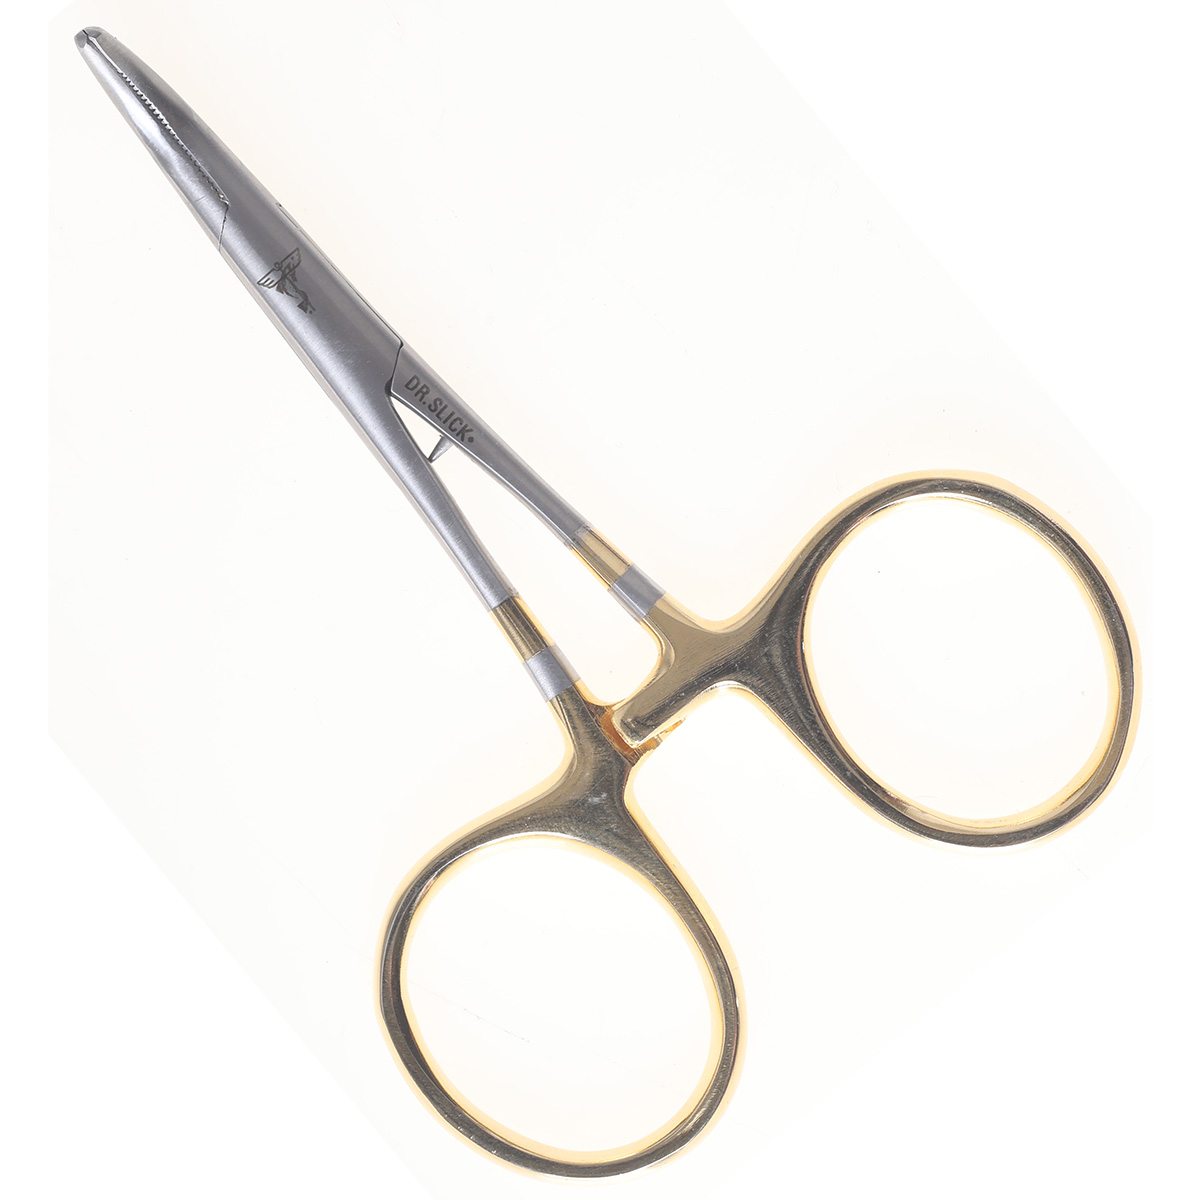 Dr Slick Curved 4 inch Gold Clamp